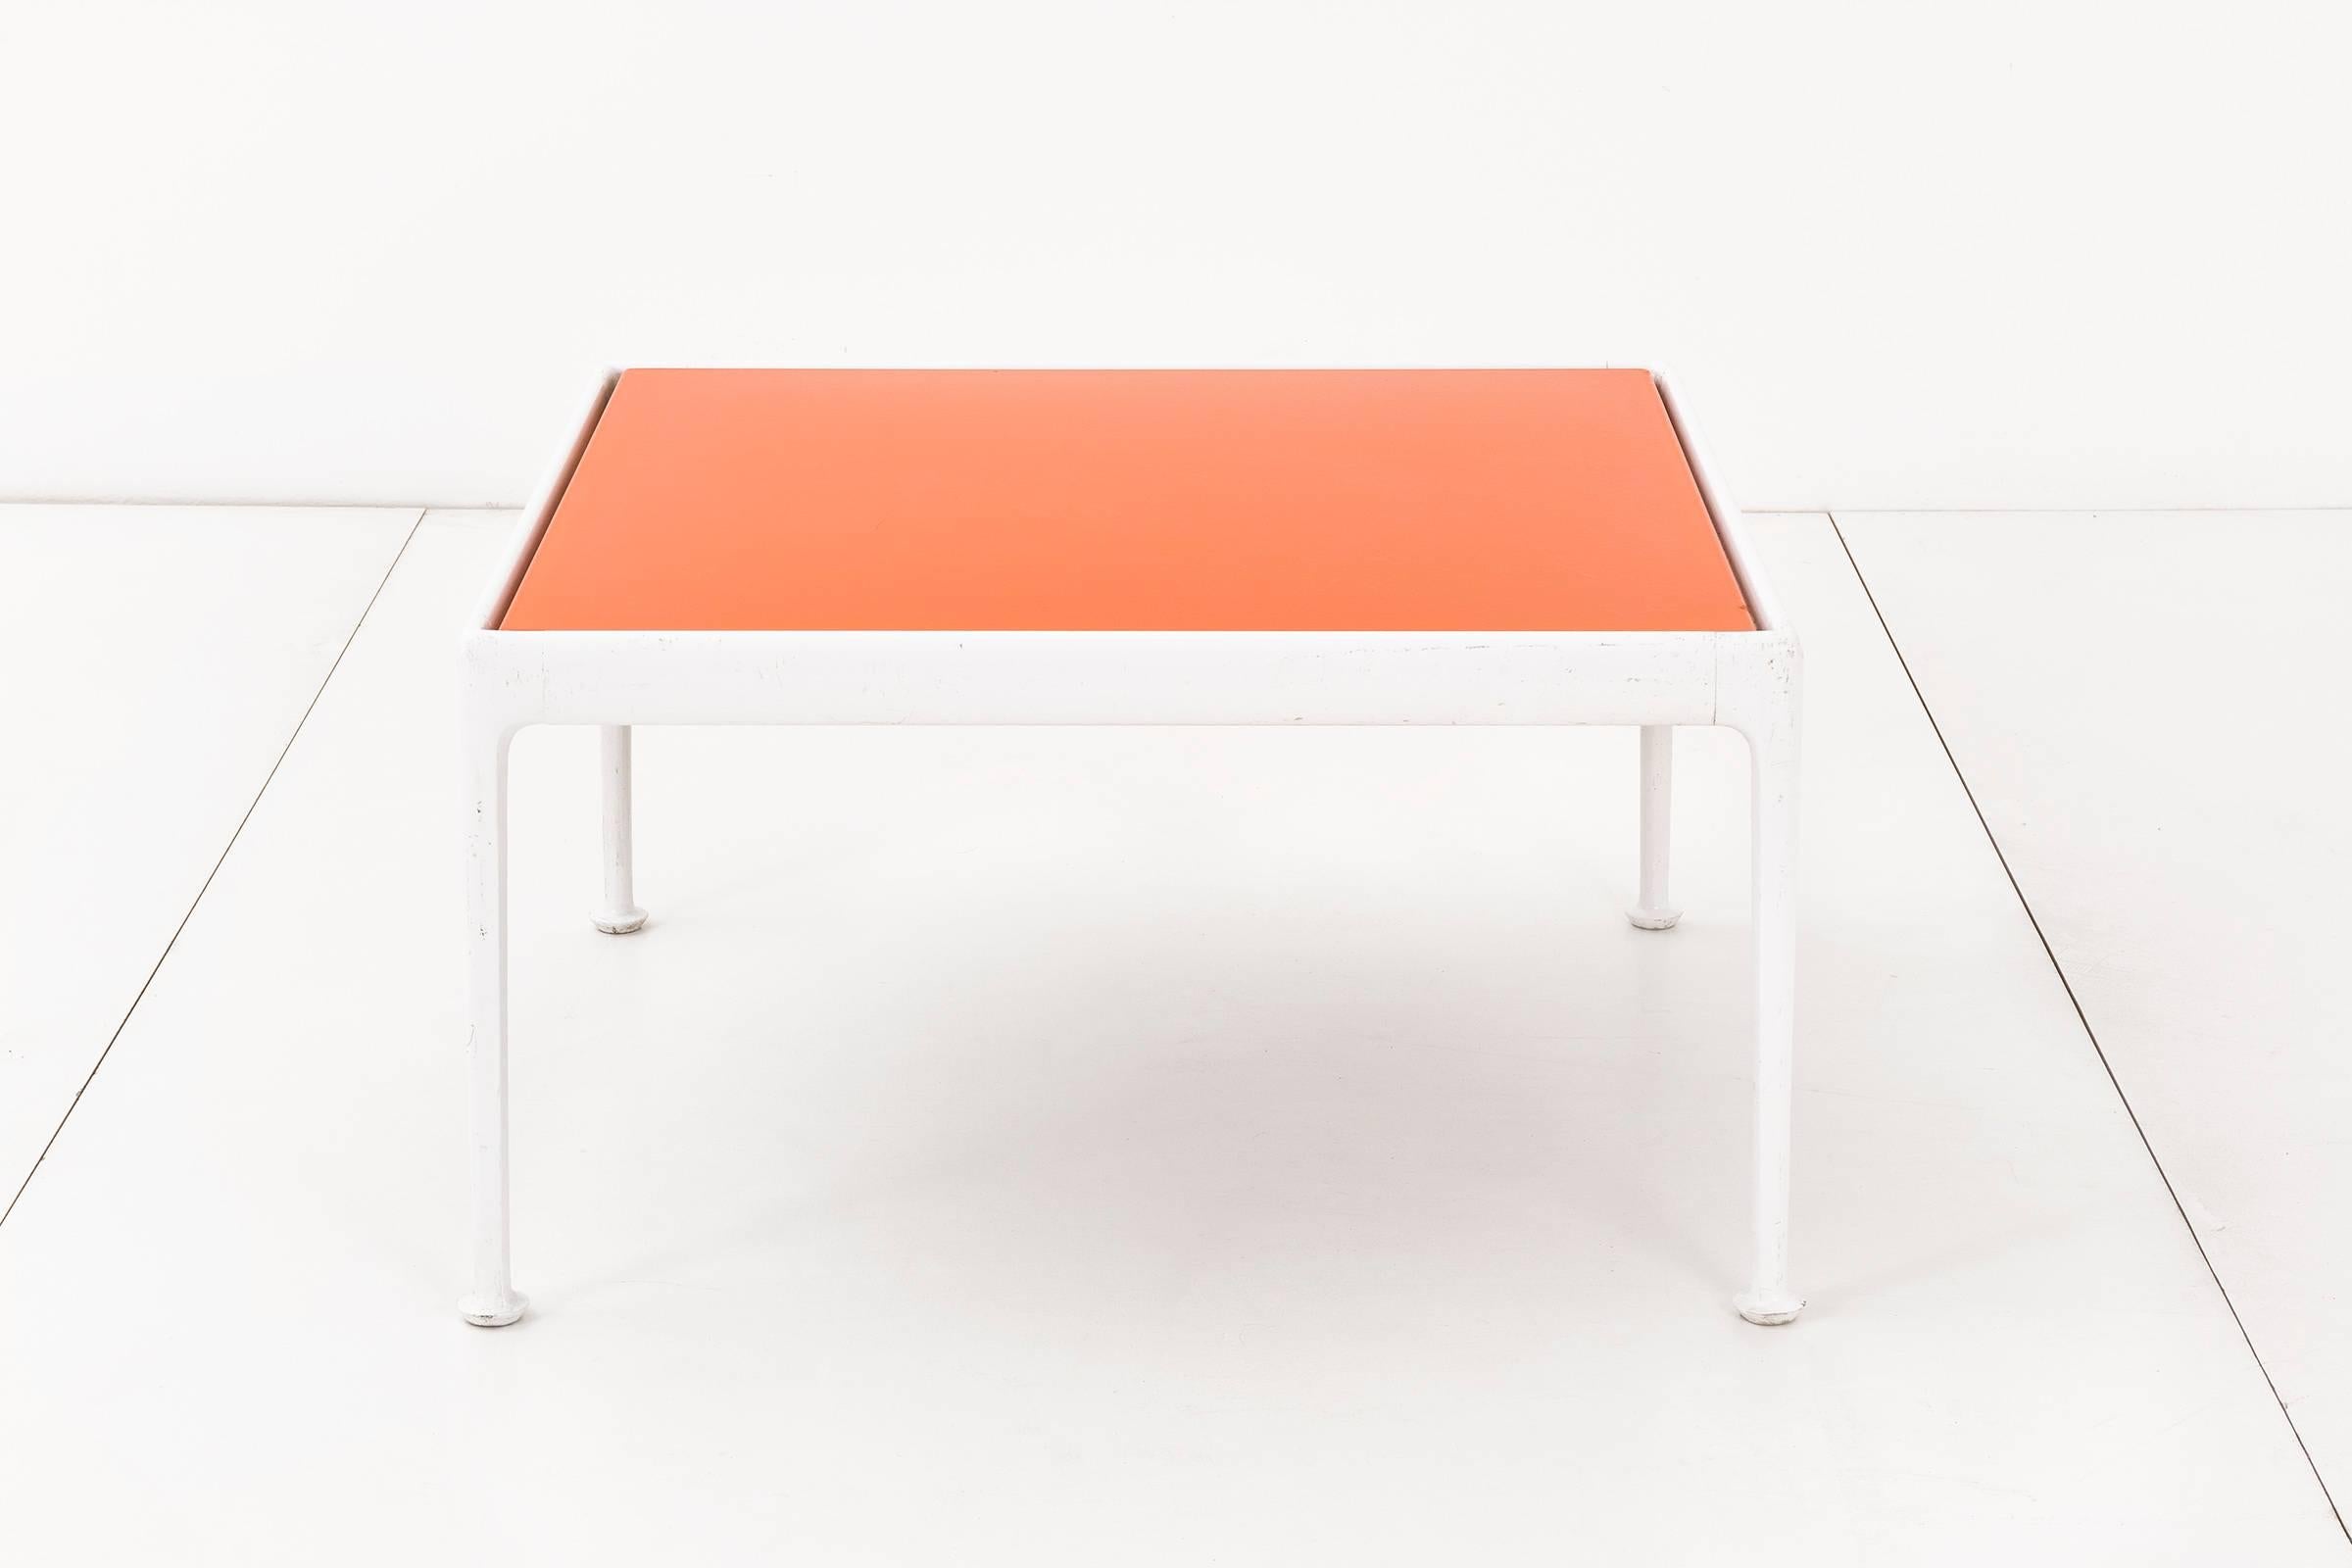 Richard Schultz outdoor coffee table for Knoll. This table has a white powder-coated, cast and extruded aluminum frame with an orange enameled porcelain on steel tabletop. The table has a weather resistant finish and a slight gap between the top and